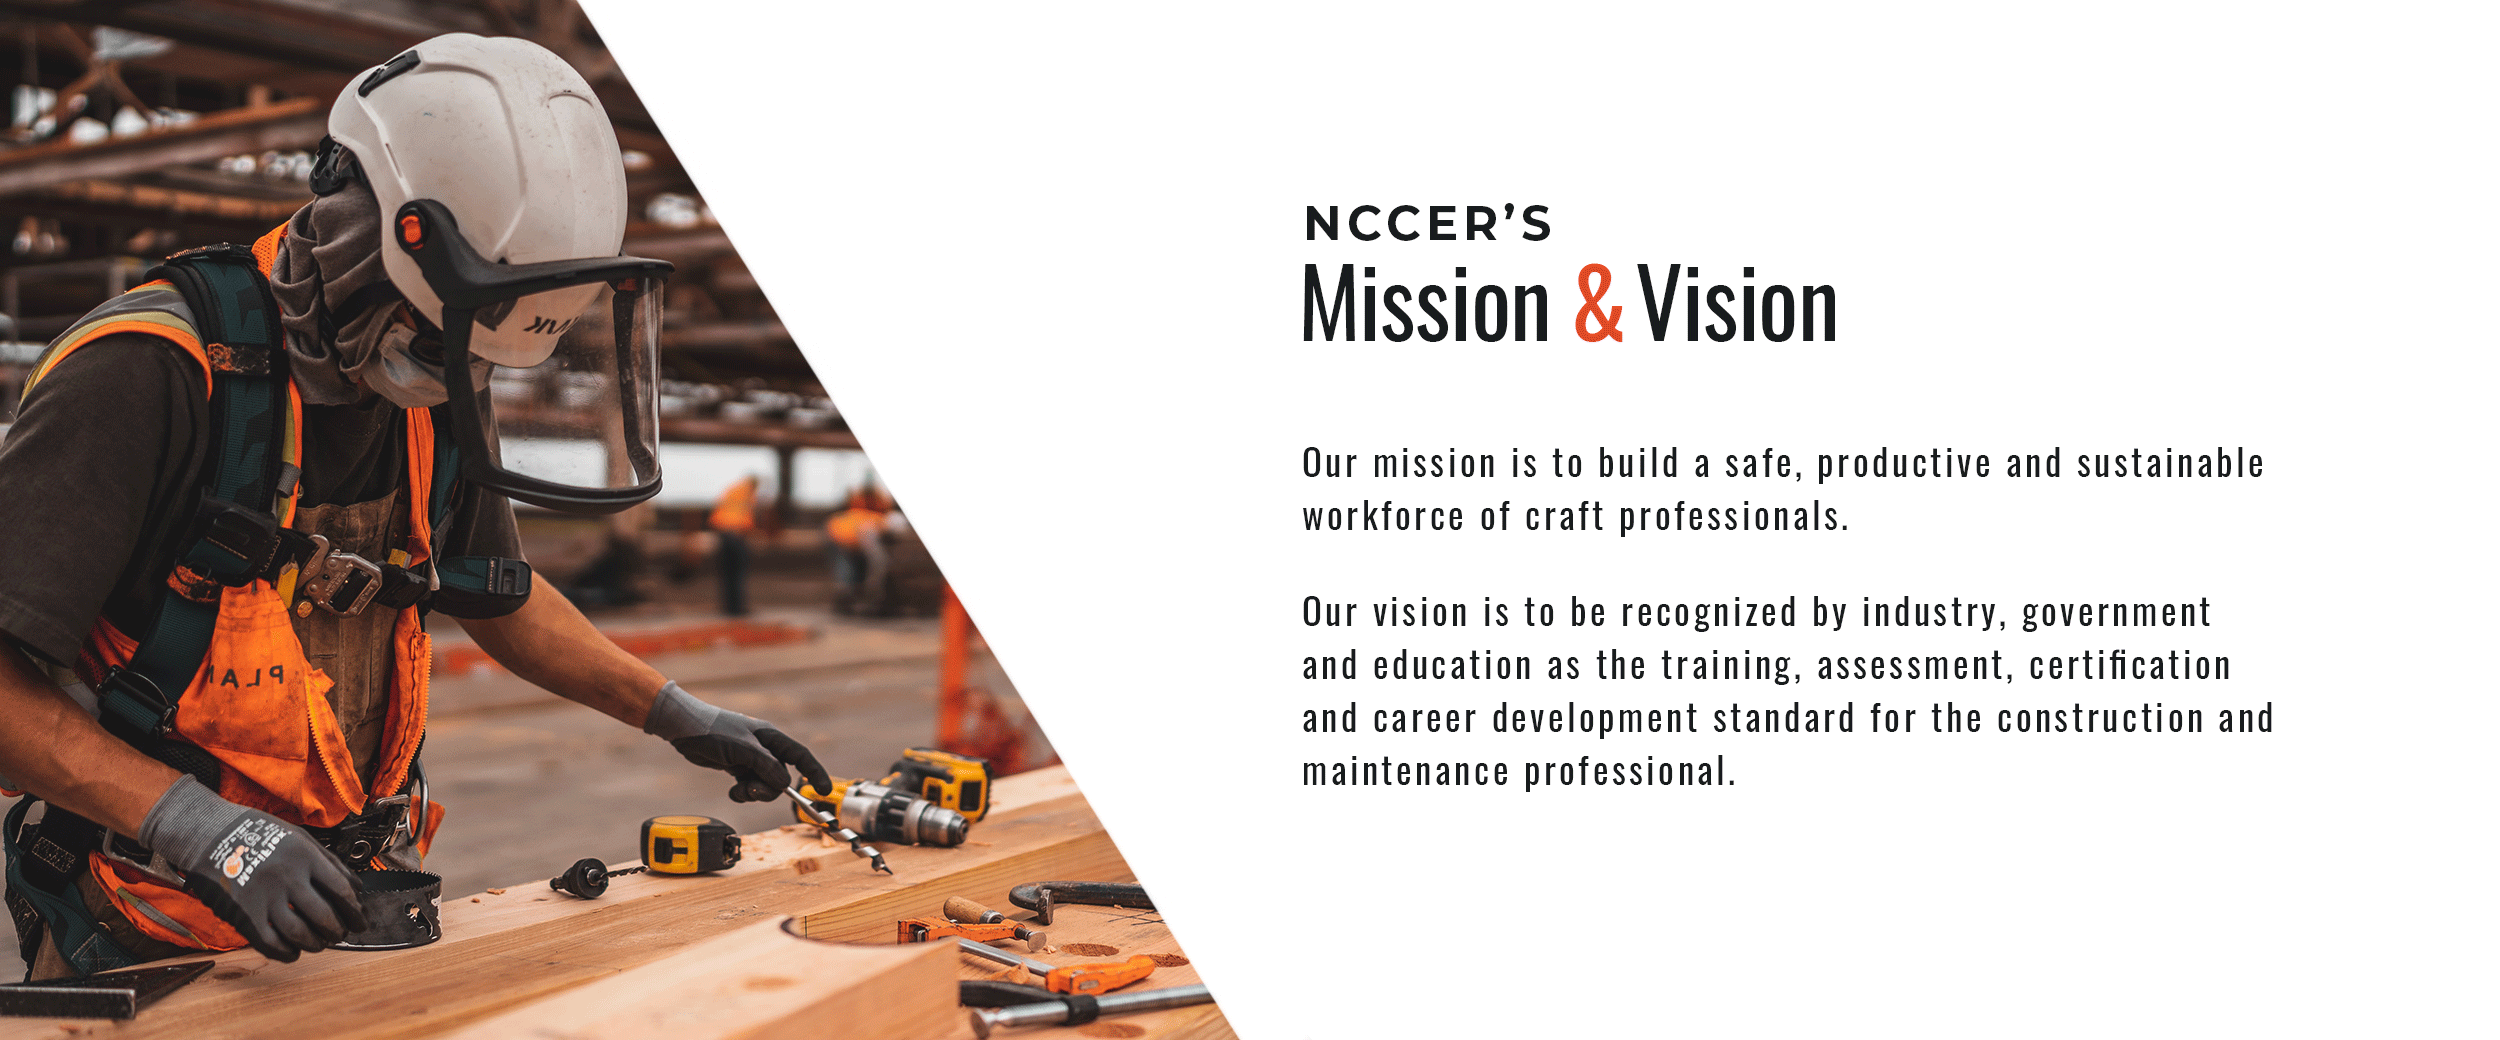 NCCER's Mission & Vision. Our mission is to build a safe, productive and sustainable workforce of craft professionals. Our vision is to be recognized by industry, government and education as the training, assessment, certification and career development standard for the construction and maintenance professional.